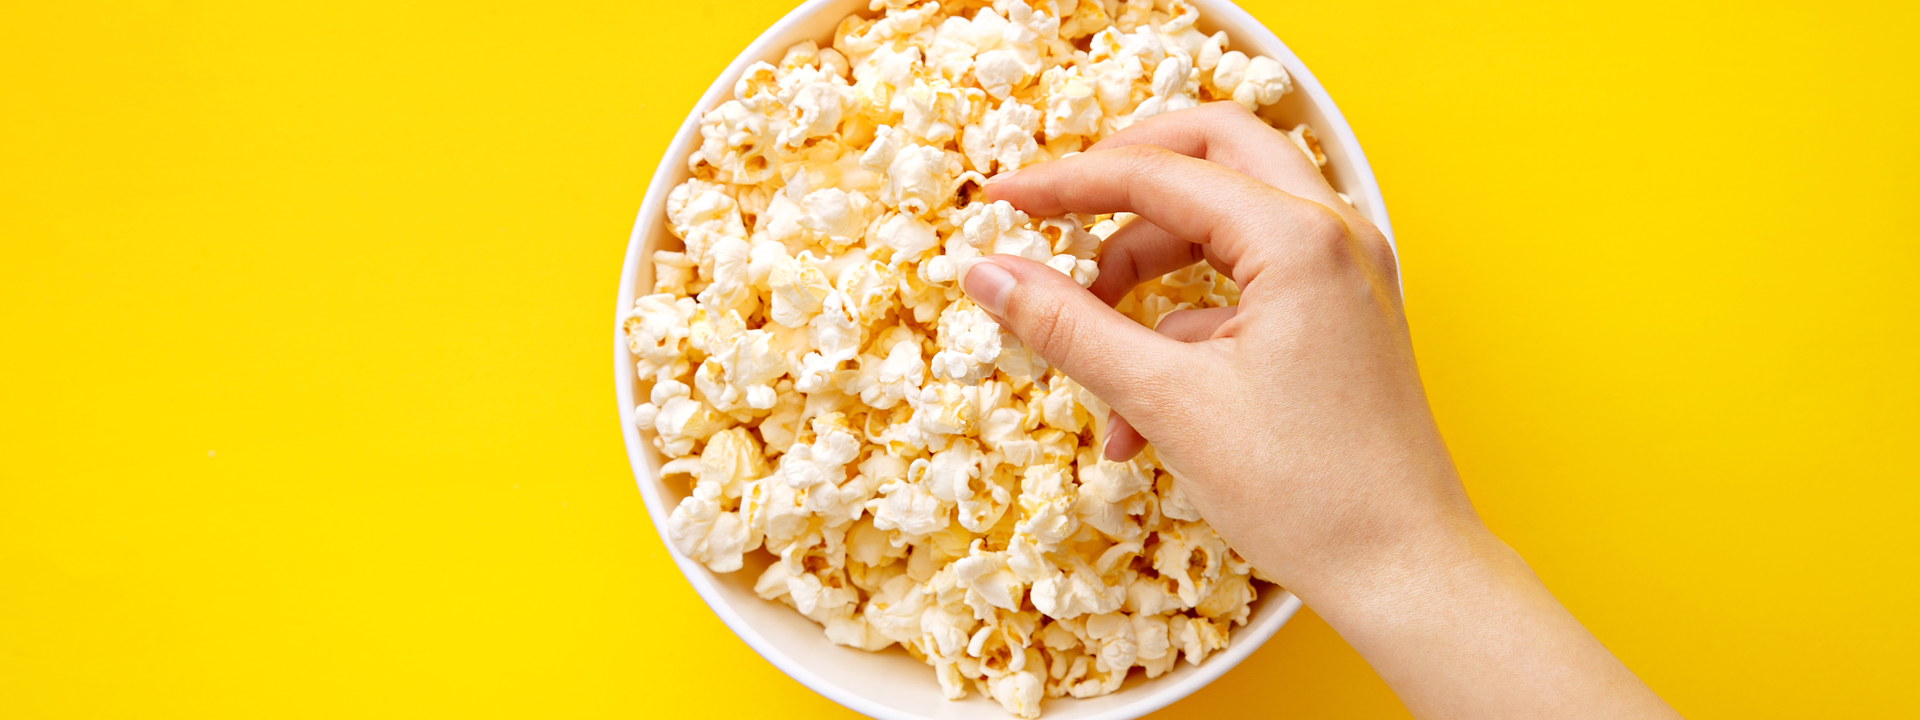 Microwave Popcorn Linked To Children’s Asthma